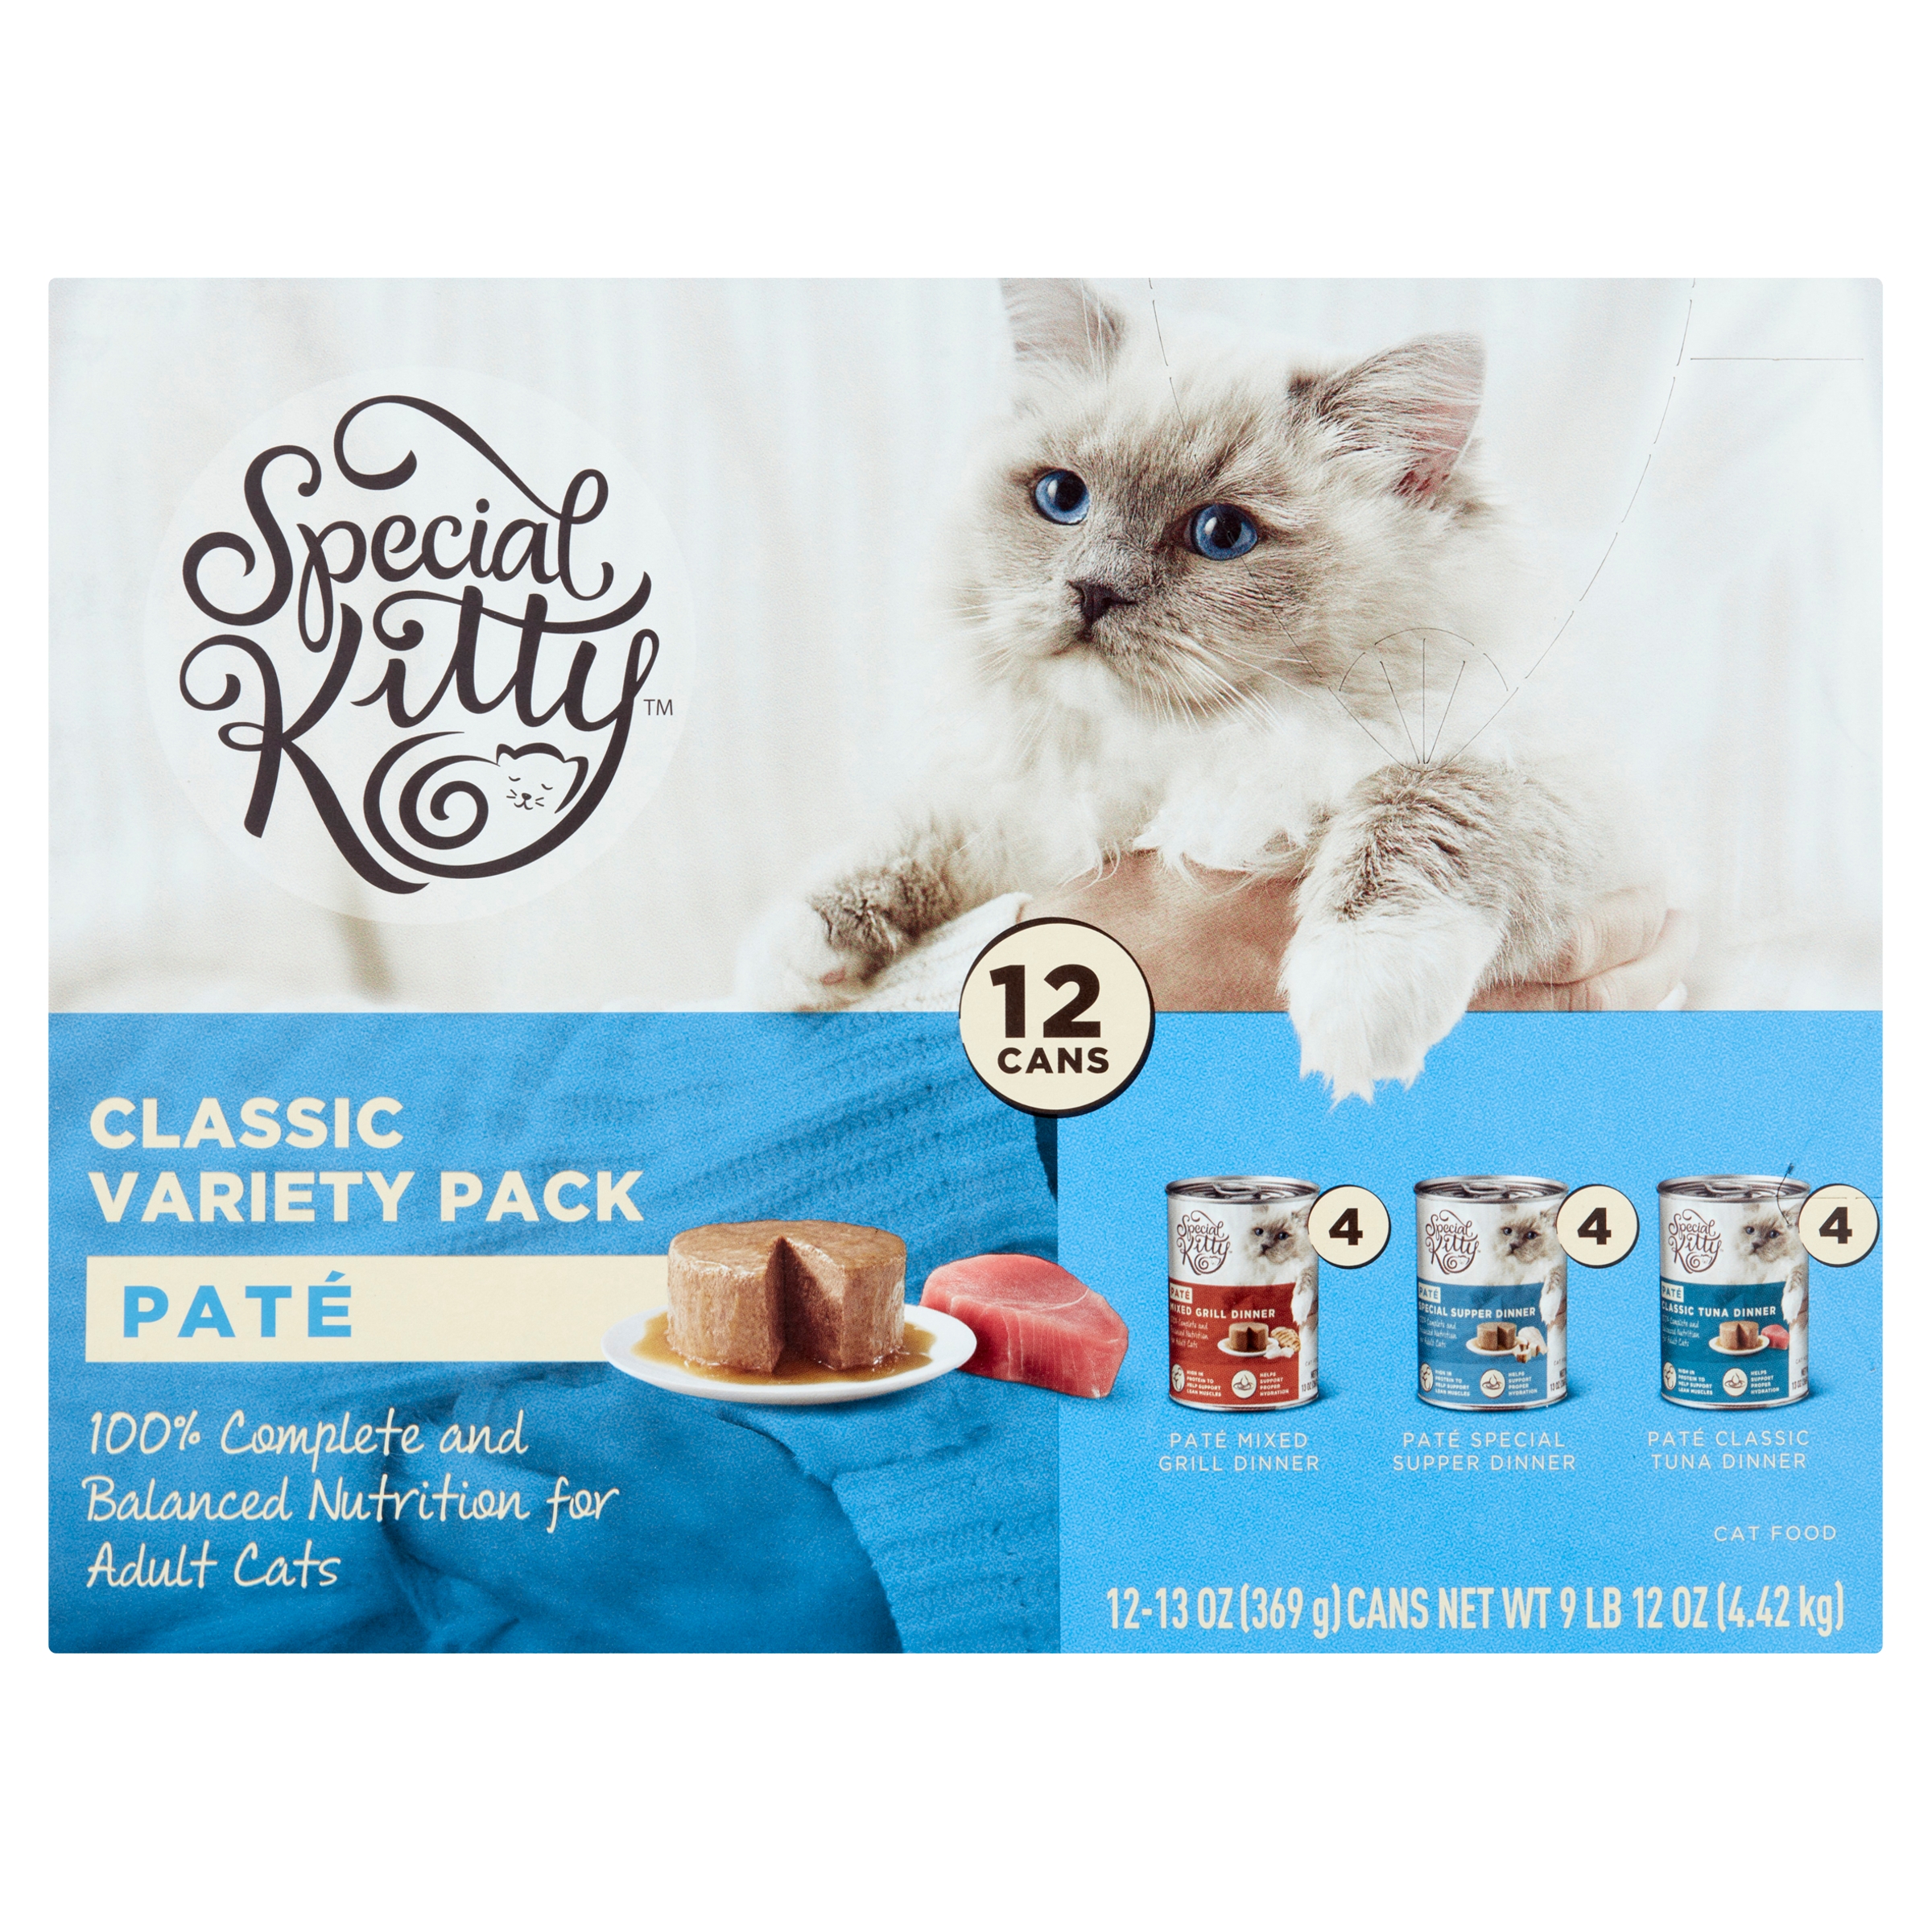 Special Kitty Beef & Tuna Flavor Pate Wet Cat Food Variety Pack for Kitten, 13 oz. Cans (12 Count) - image 1 of 12